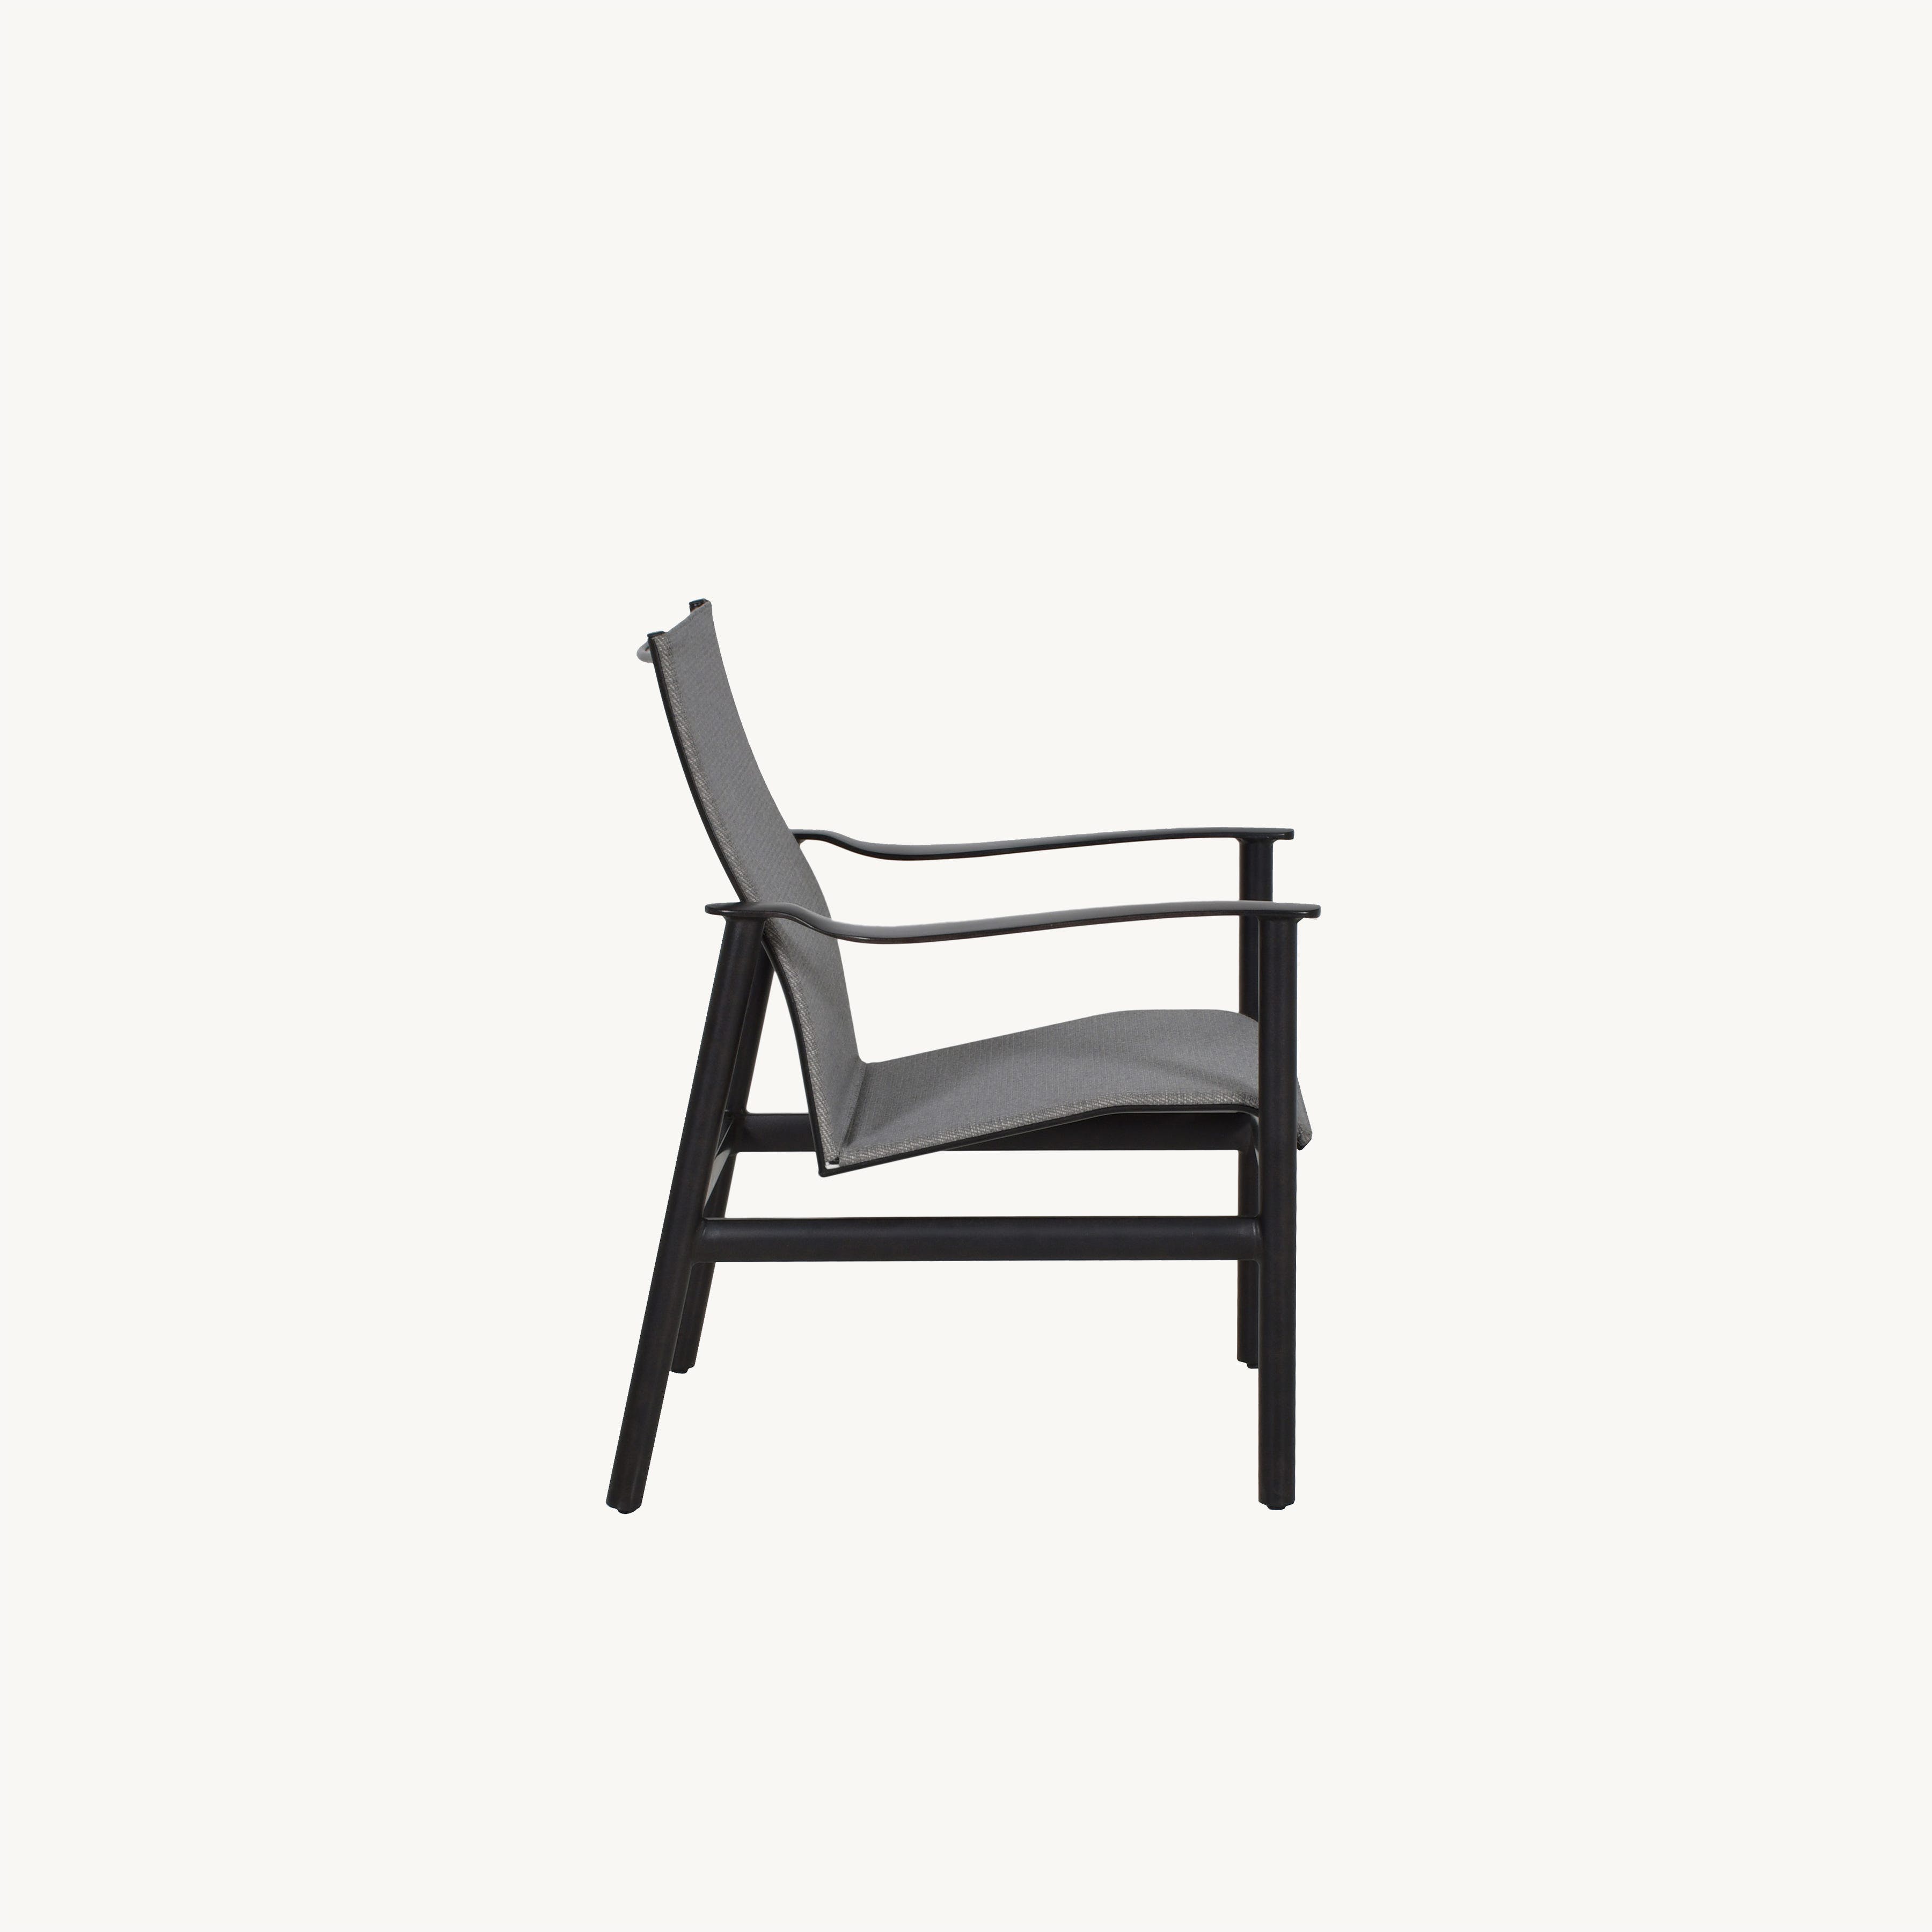 Barbados Sling Dining Chair By Castelle